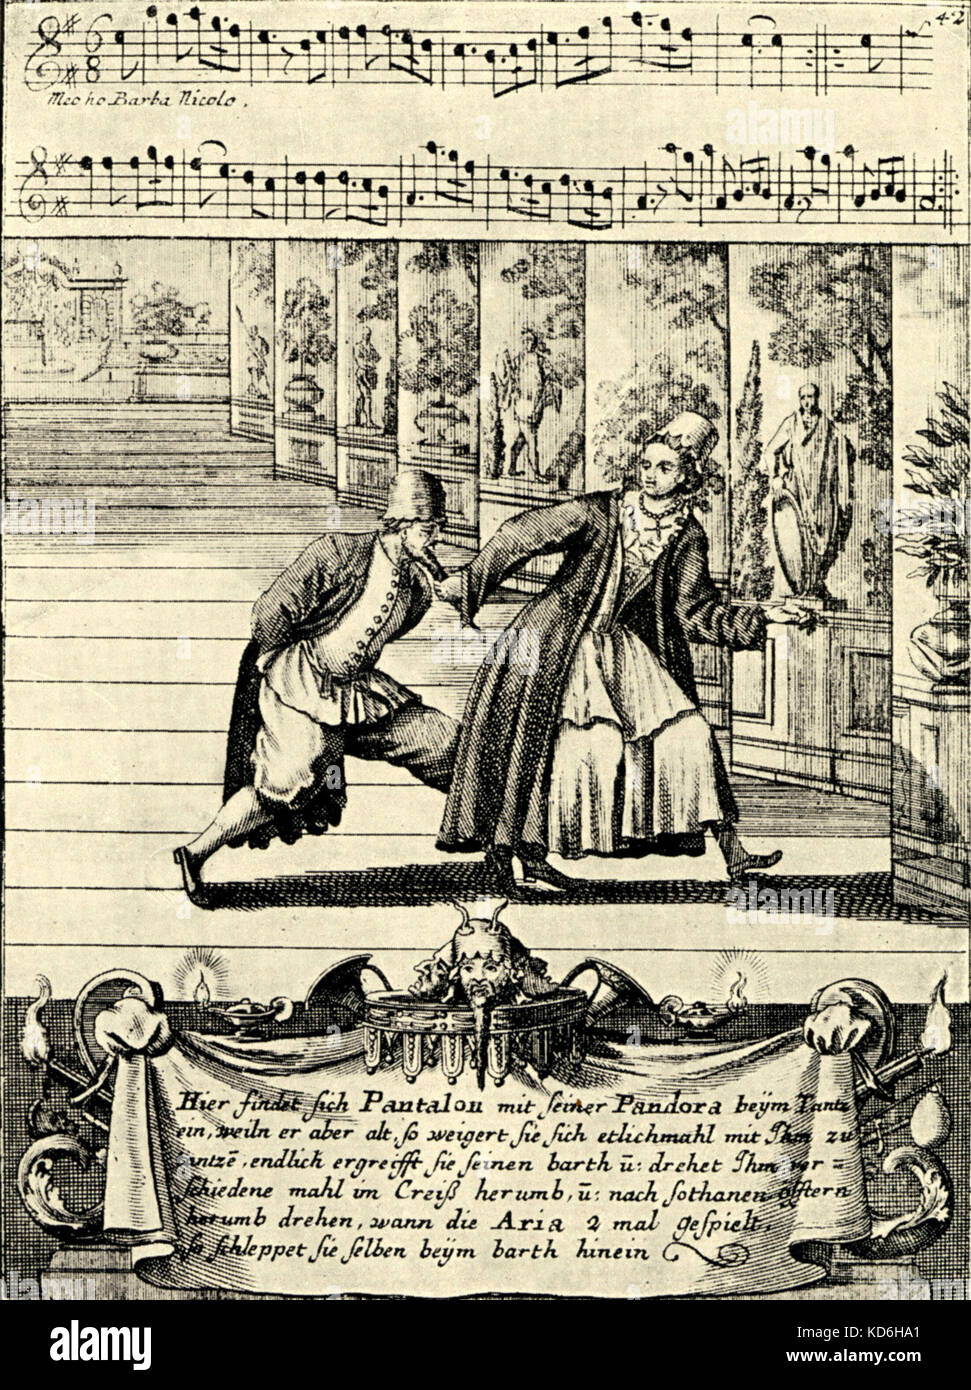 Commedia dell' Arte scene with  'Pantalone and Pandora'. Engraving with caption at the bottom giving details of the action on stage, and part of score on top.  From a book by Gregorio  Lambranzi.       New and Curious School of Theatrical Dancing/ Nuova e curiosa scuola de' balli theatrali - Neue und curieuse theatralische Tantz-Schul Stock Photo